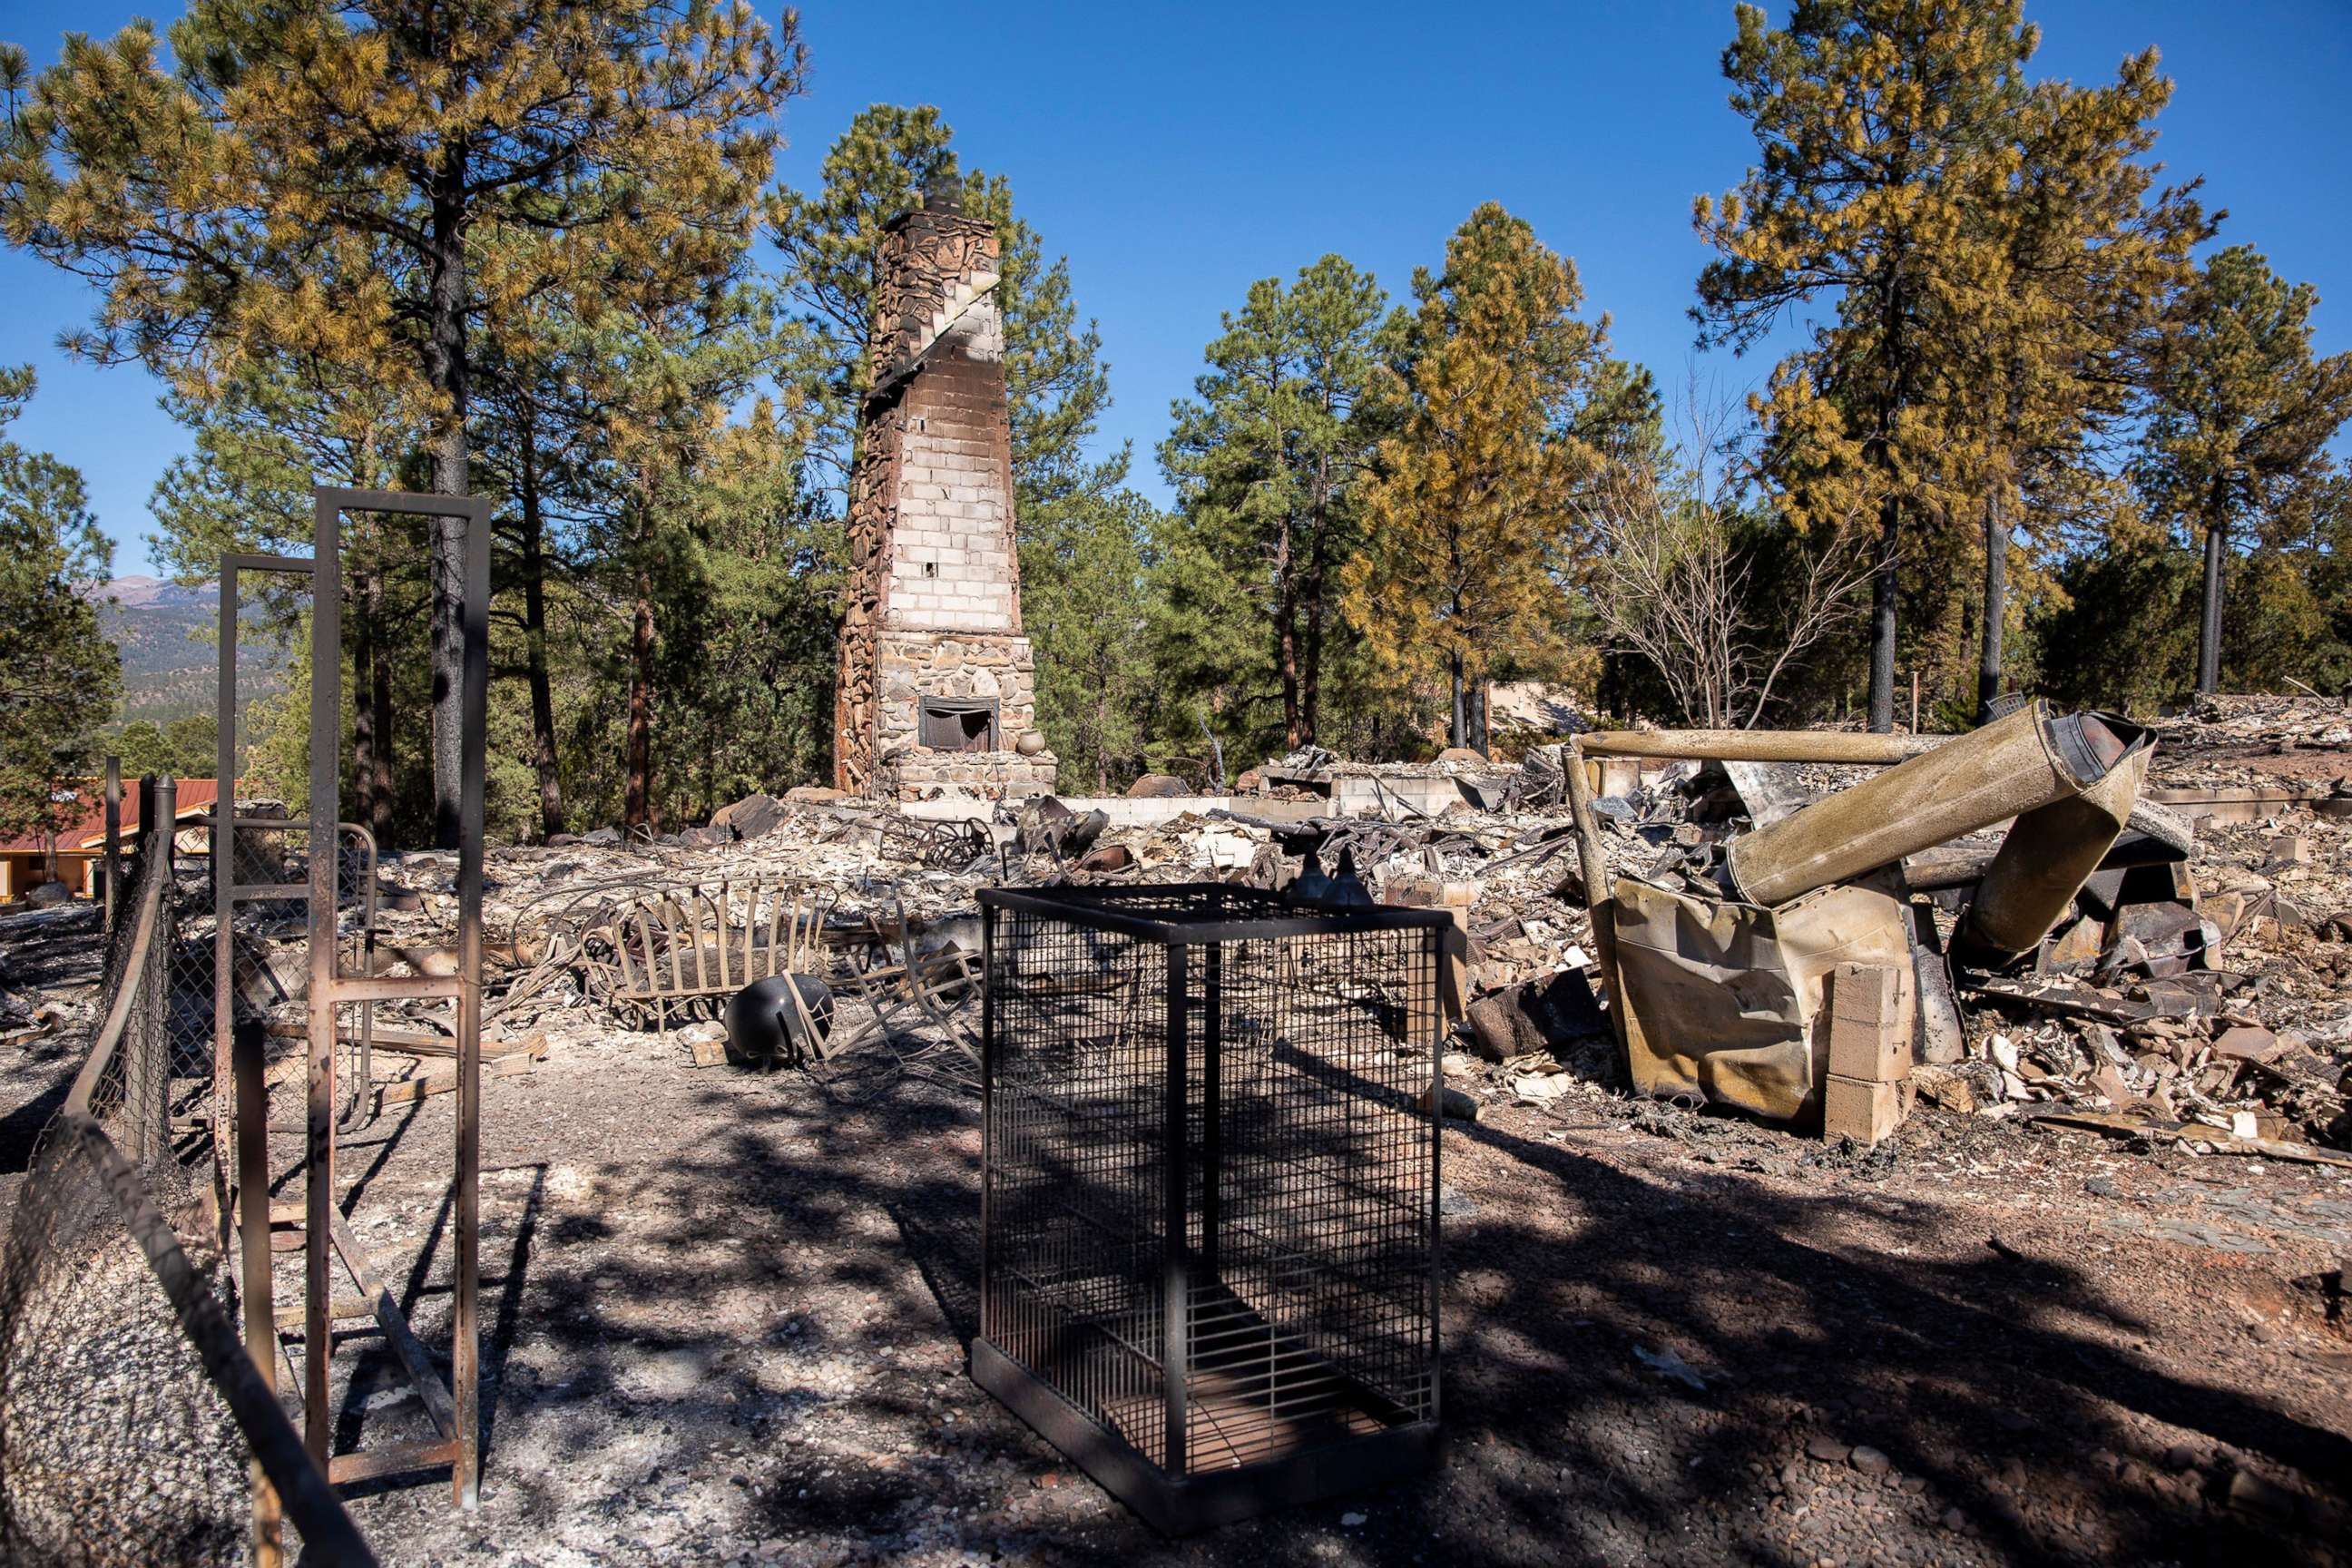 PHOTO: Remnants of a home burned down by the McBride Wildfire in are pictured in Ruidoso, N.M., on April 15, 2022. Town officials have stated that the McBride fire ignited on April 12. 